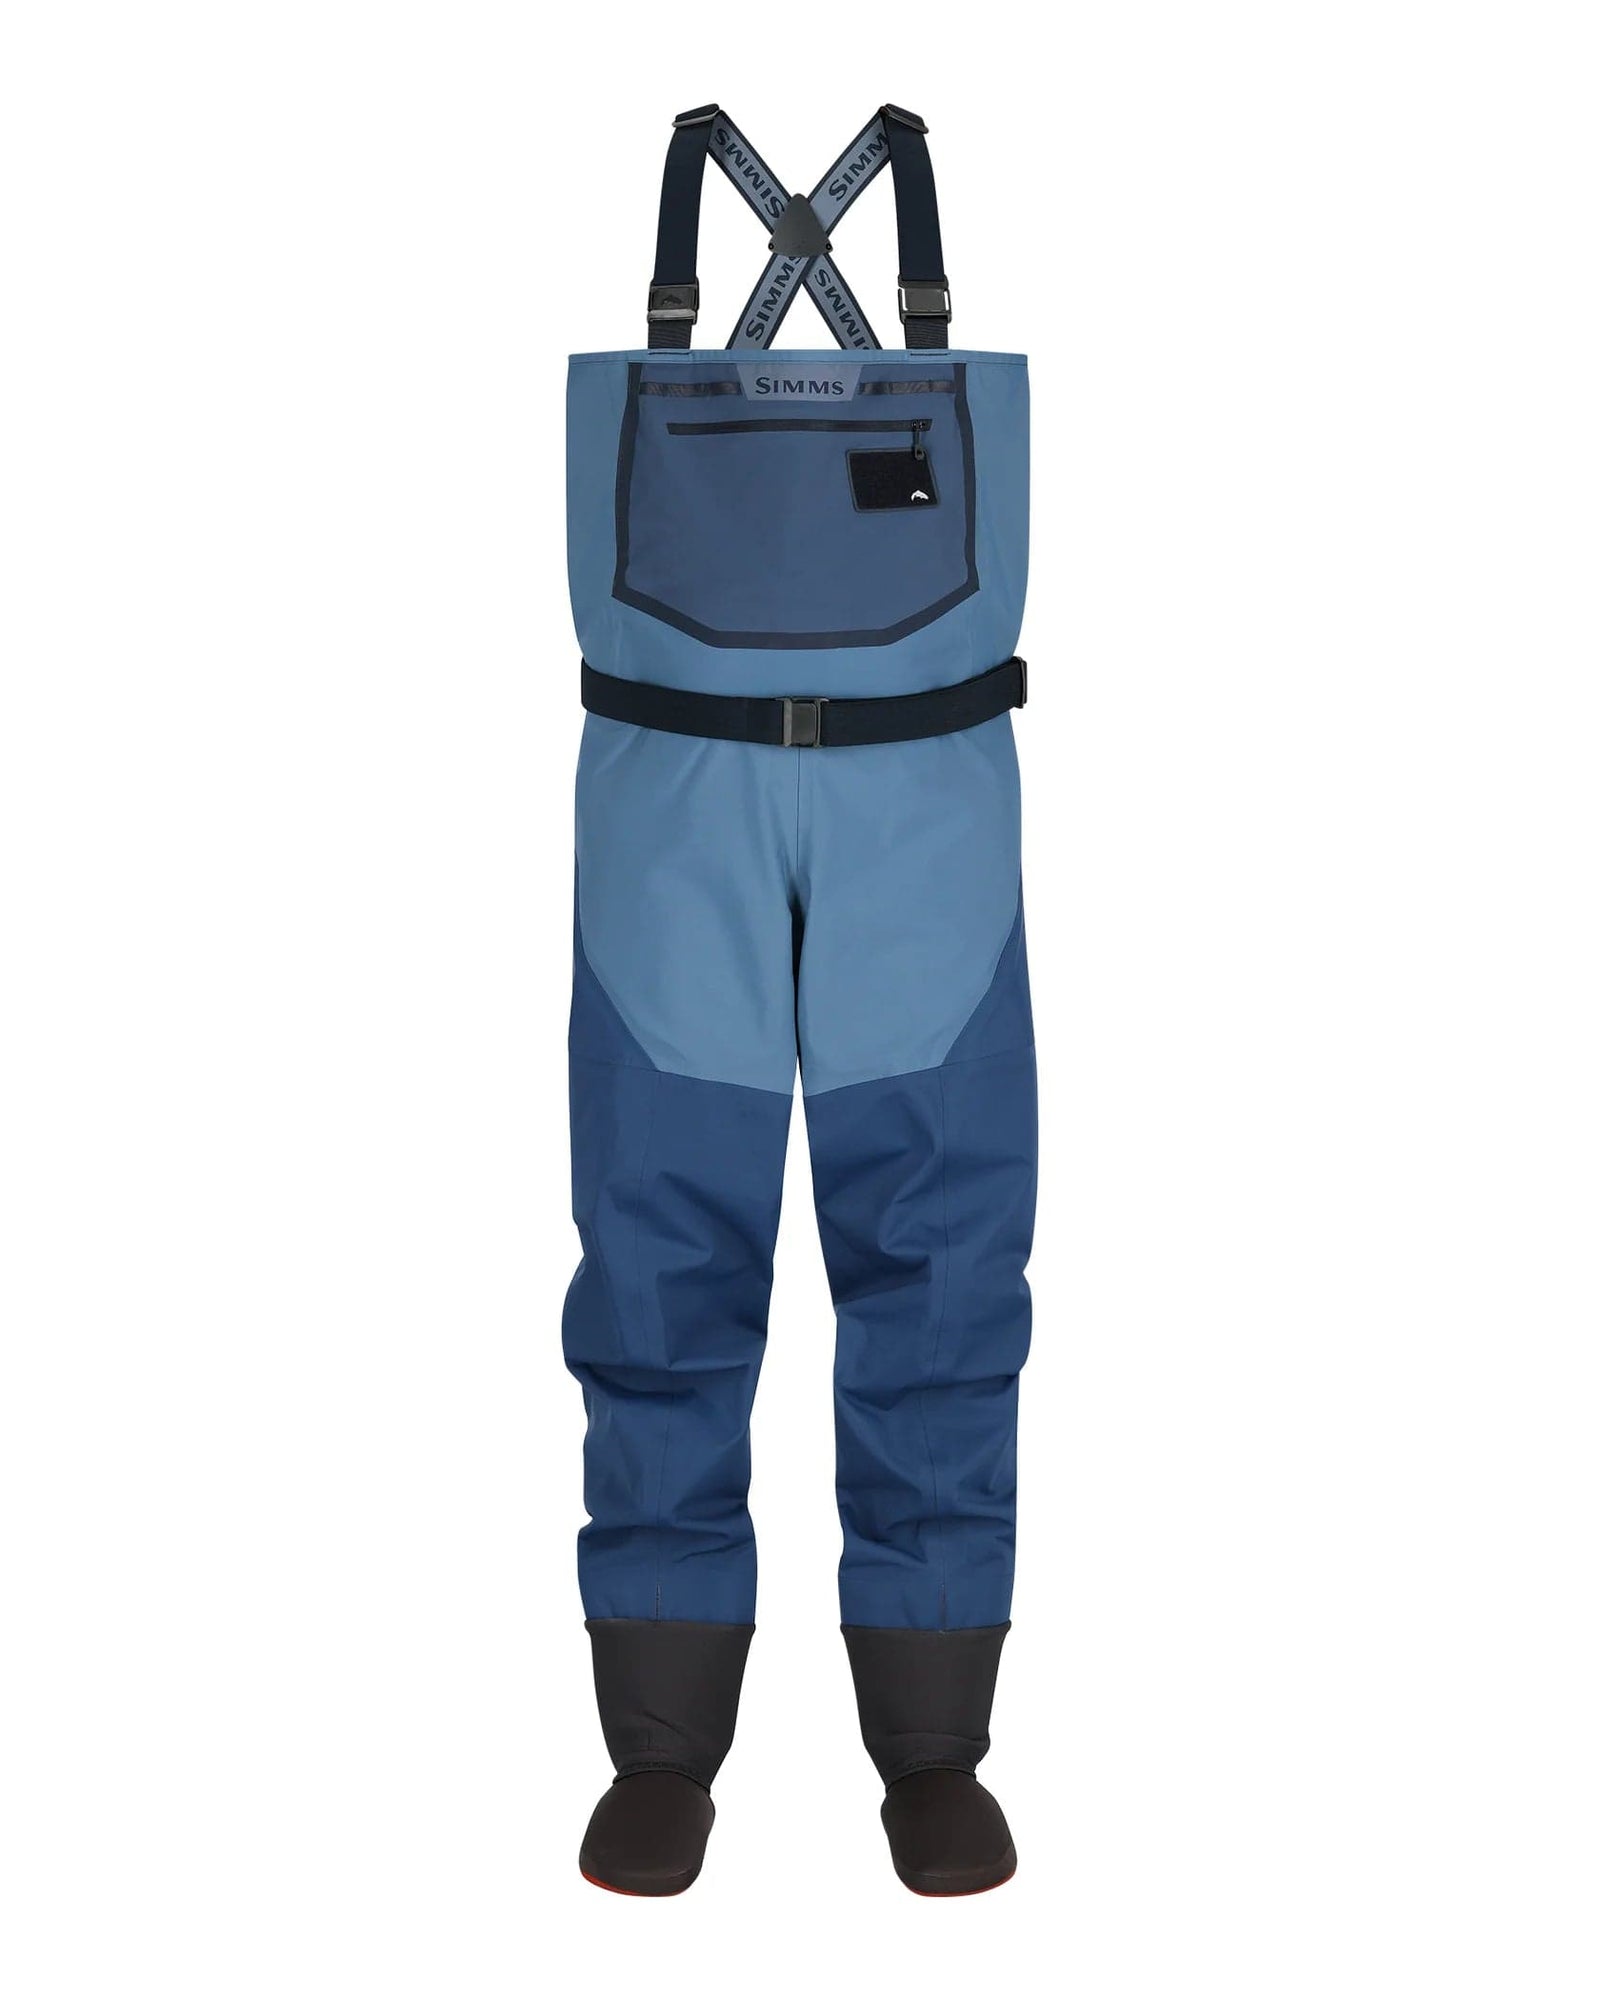 Simms G3 Guide Stockingfoot Waders - 2022 - The Saltwater Edge